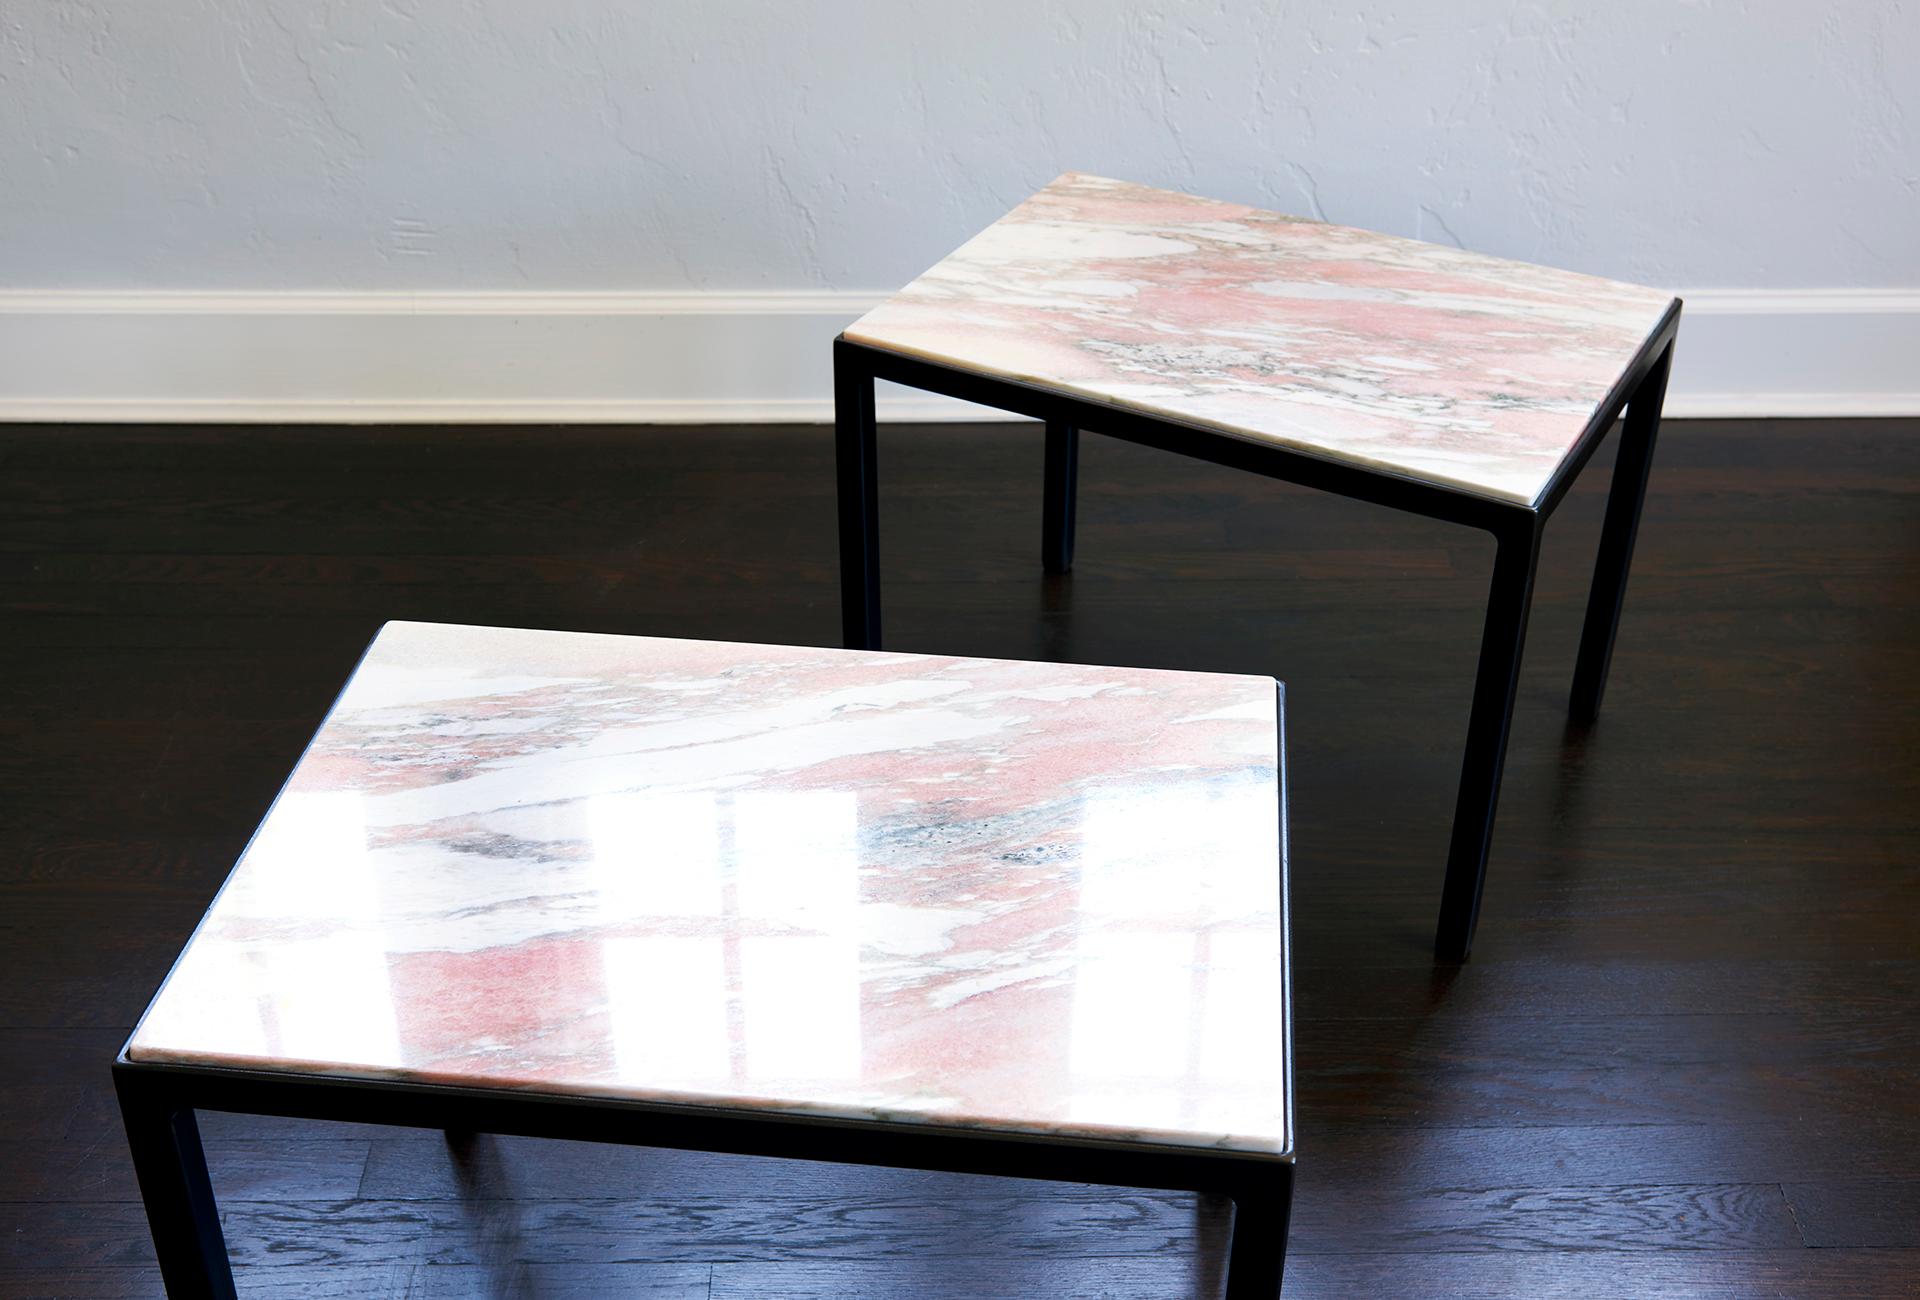 Shizen Studio presents the Pietra Tables, designed by India Foster. These tables are made from reclaimed marble and recycled steel. The polished stone top is backed with cork and sits on a blackened steel frame. Every piece I make is unique. I